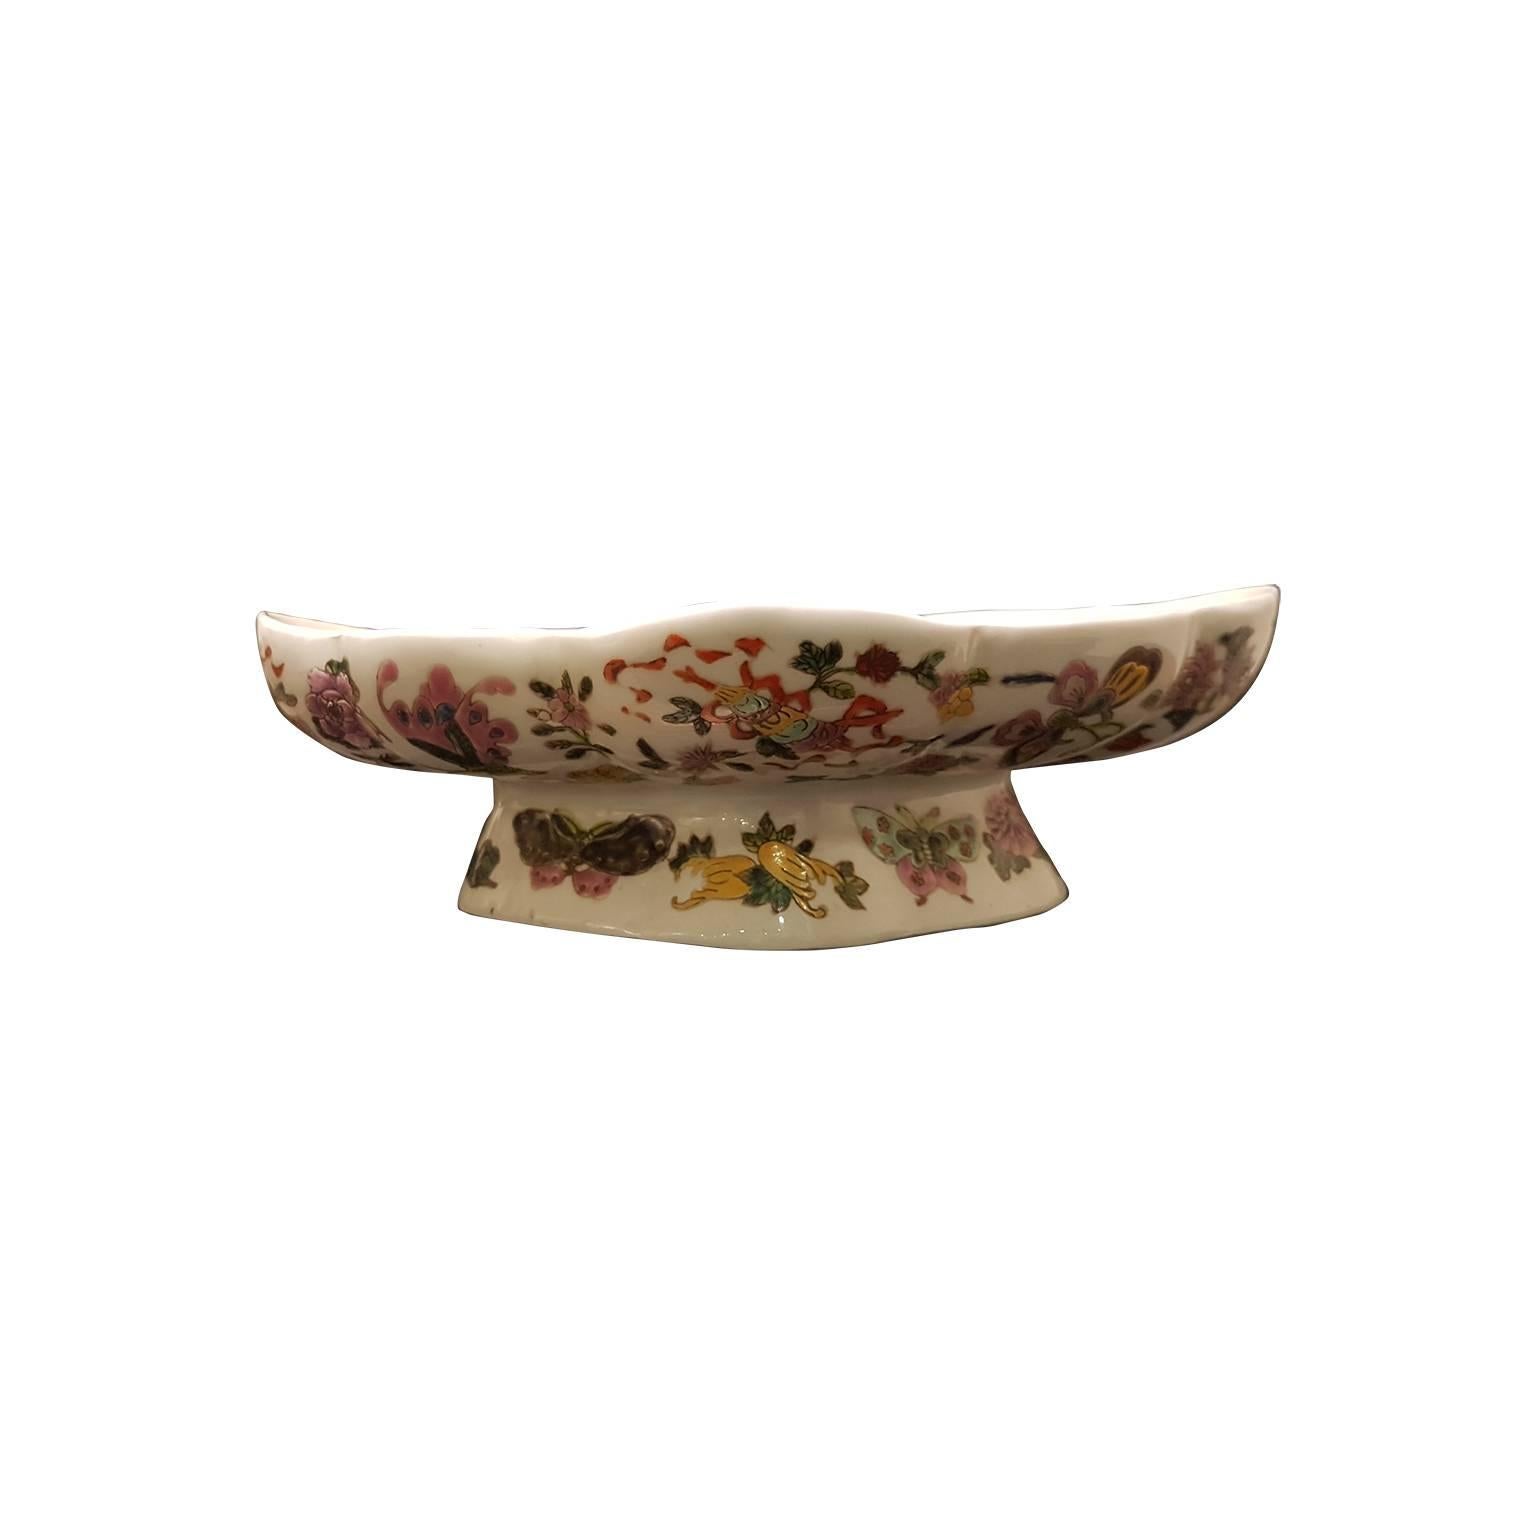 Chinese bowl painted in bright enamels with beautiful decorations of flowers, leaves and butterflies. Chinese red mark at the bowl bottom. 

This product is located and shipped from Italy.